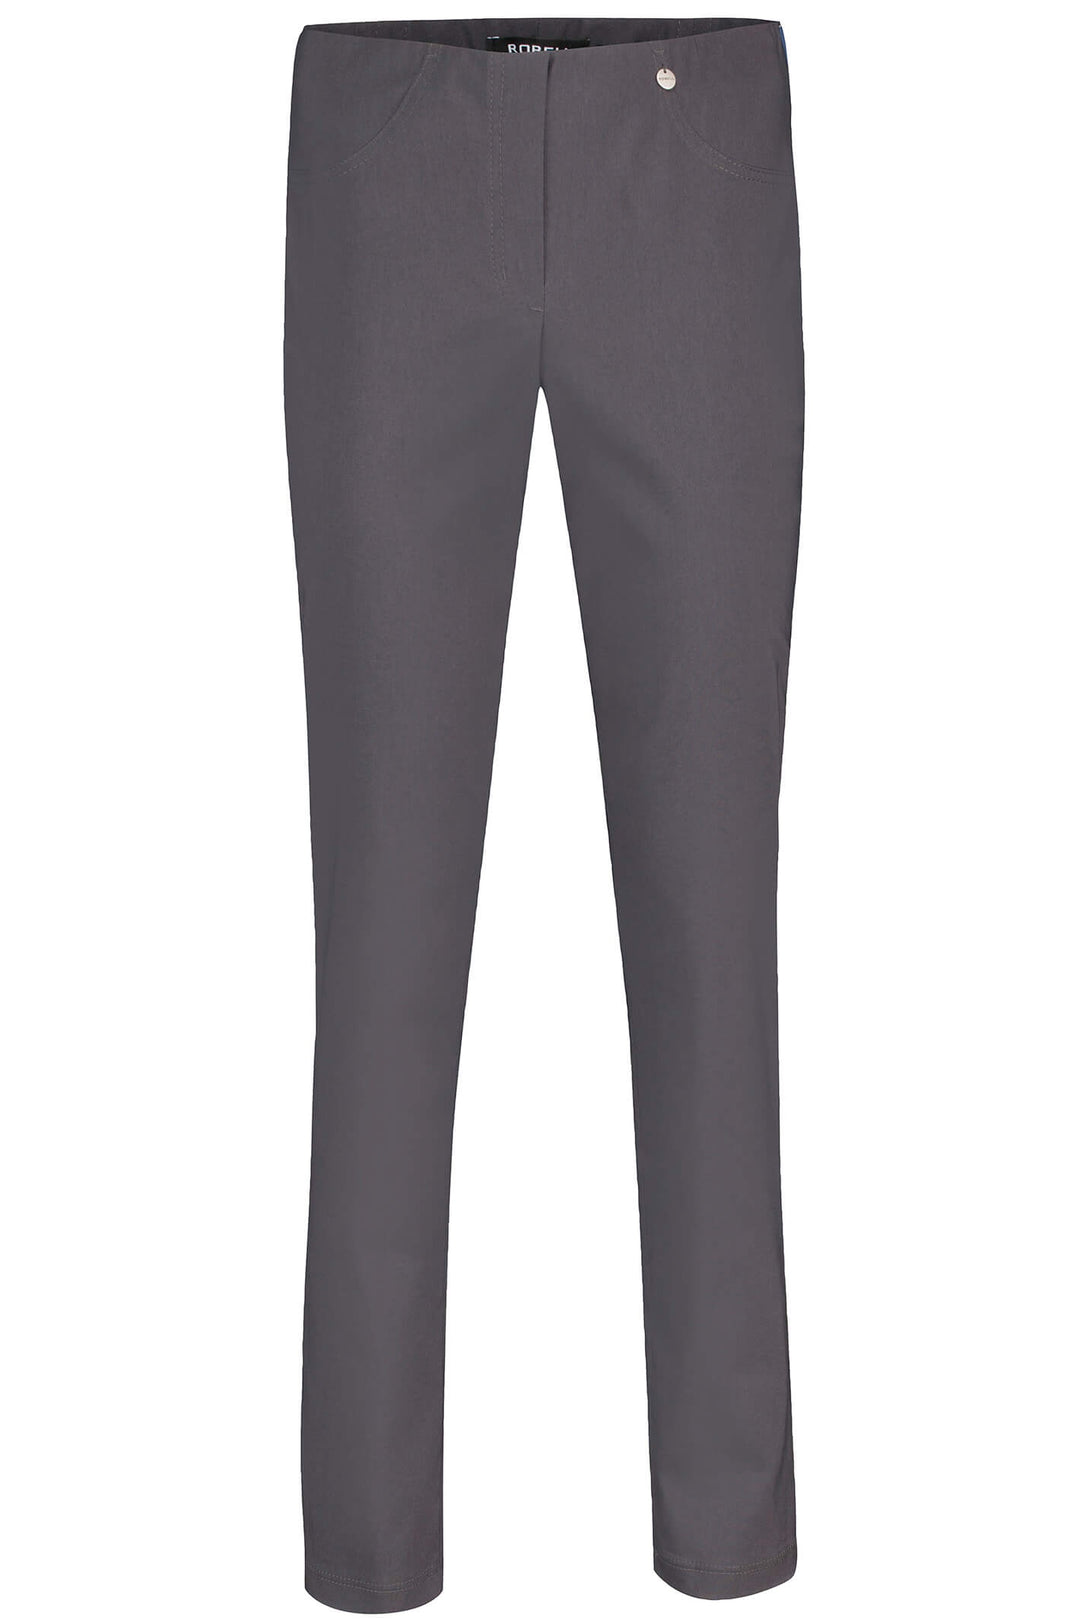 Robell 51559-5499-97 Bella Charcoal Grey Full Length Pull-On Trousers - Dotique